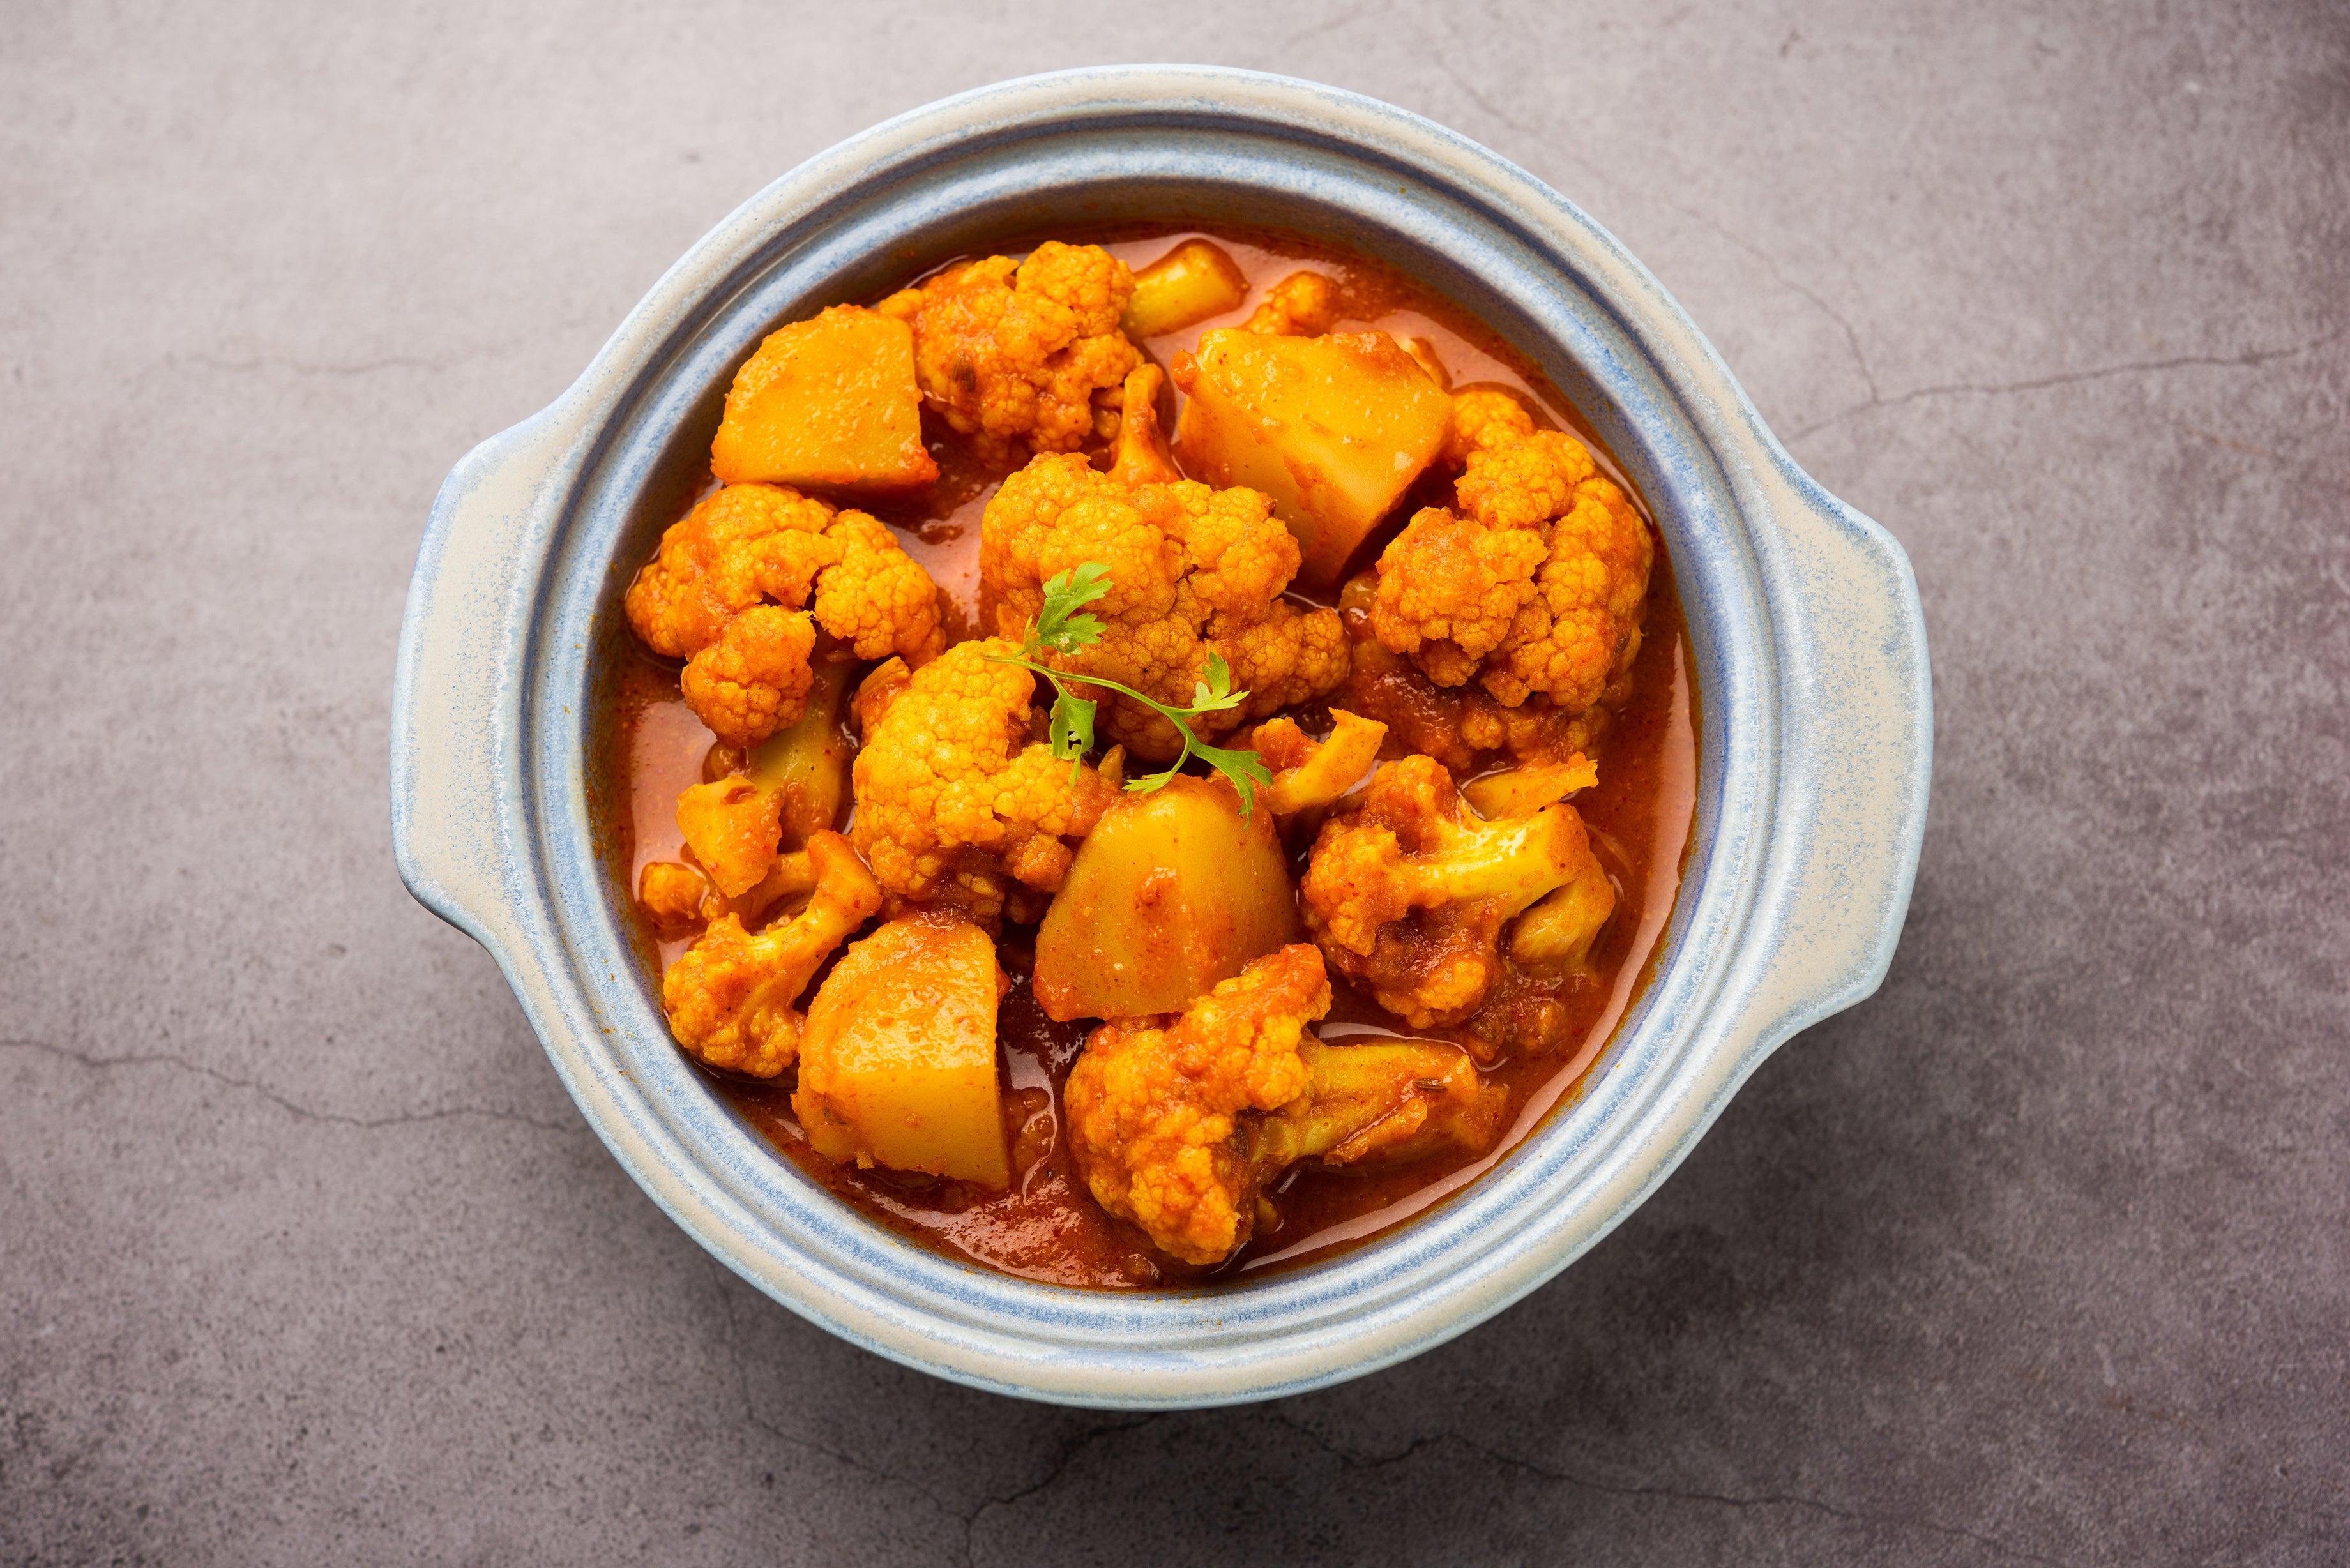 Aloo Gobi*A classic Indian dish made with cauliflower and potatoes, flavored with spices such as cumin, turmeric, and coriander.